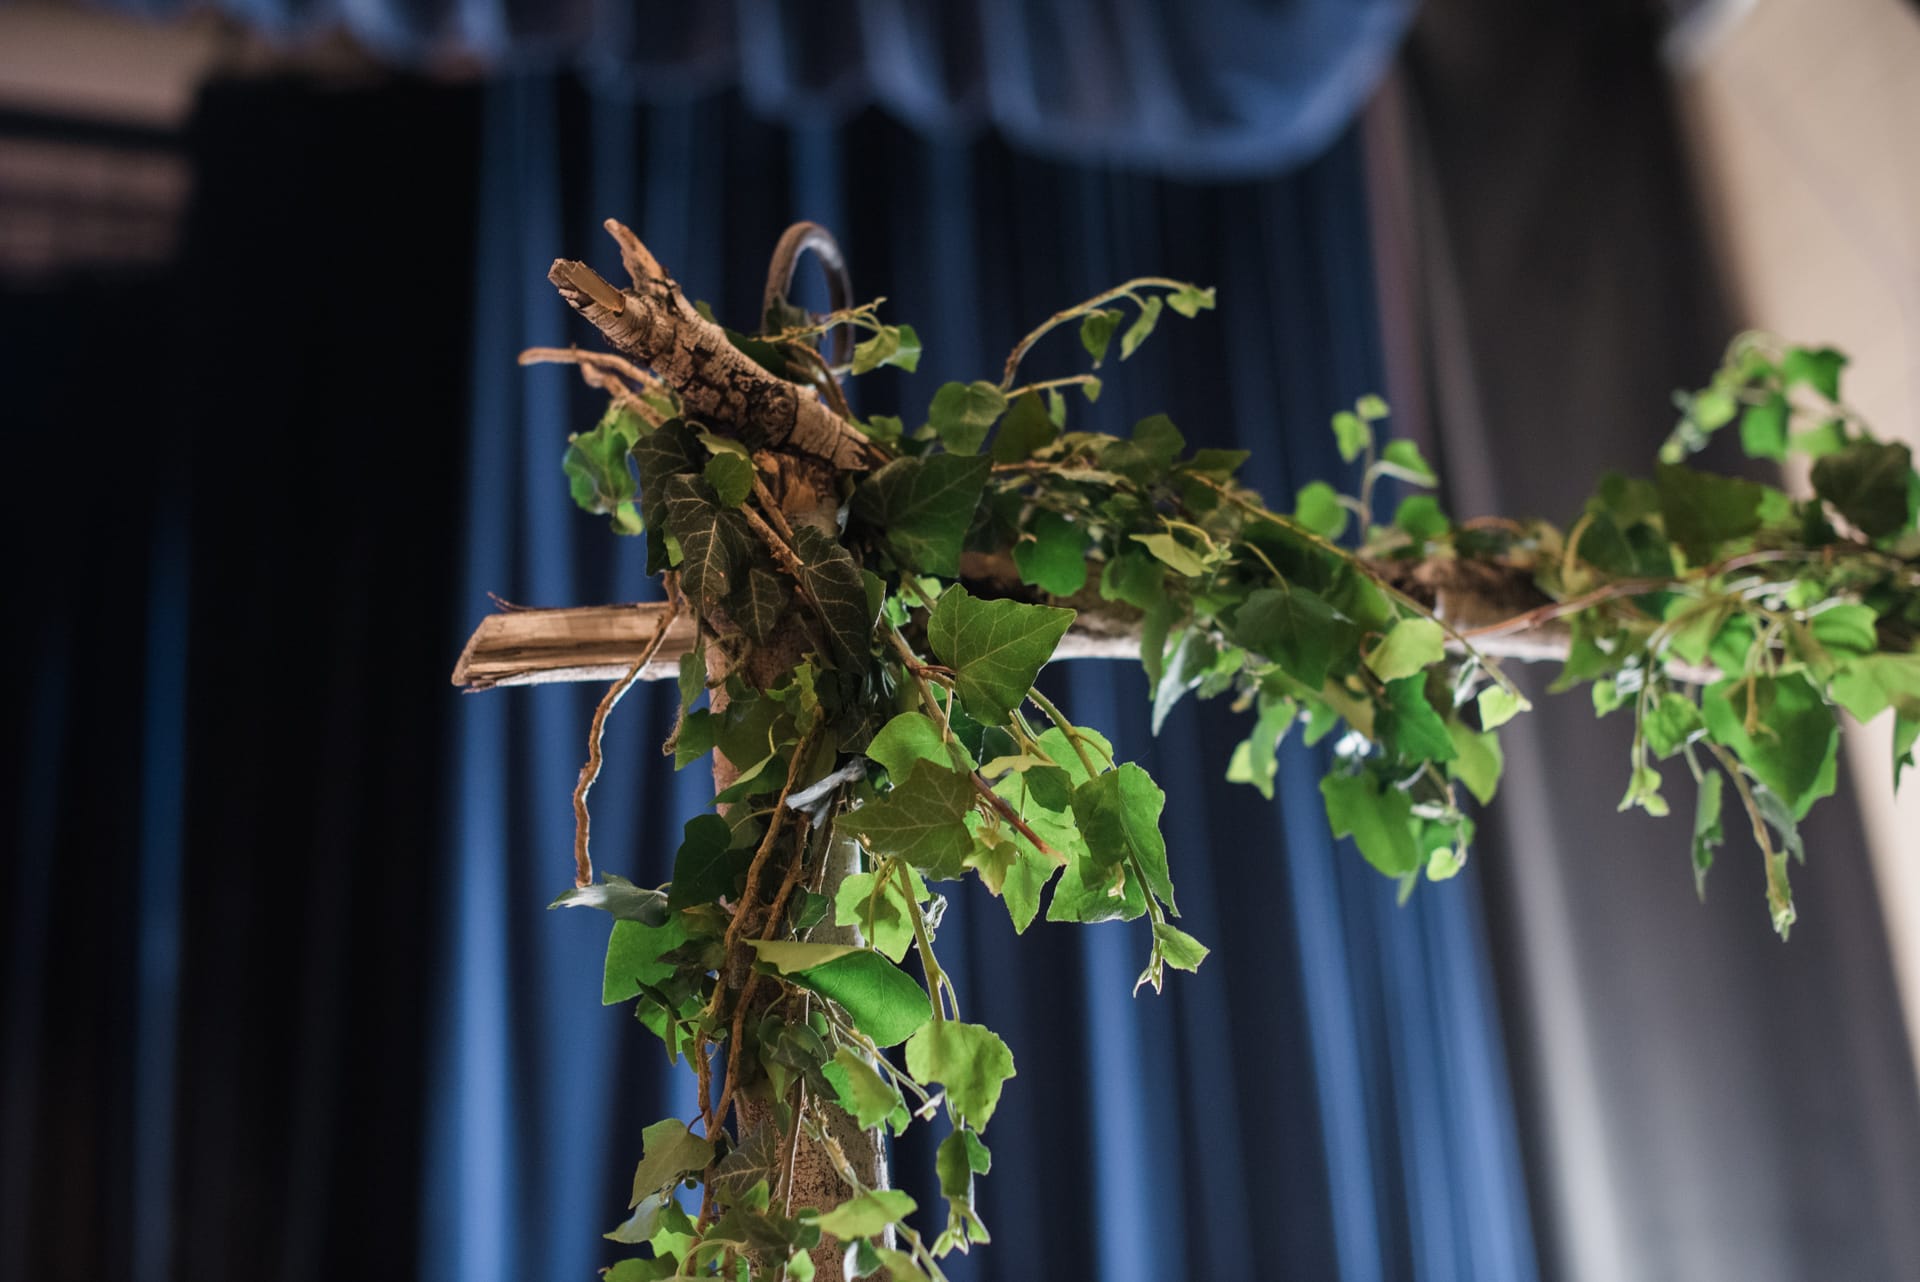 upclose of Denver Waldorf School Graduation Arch with branches and leaves